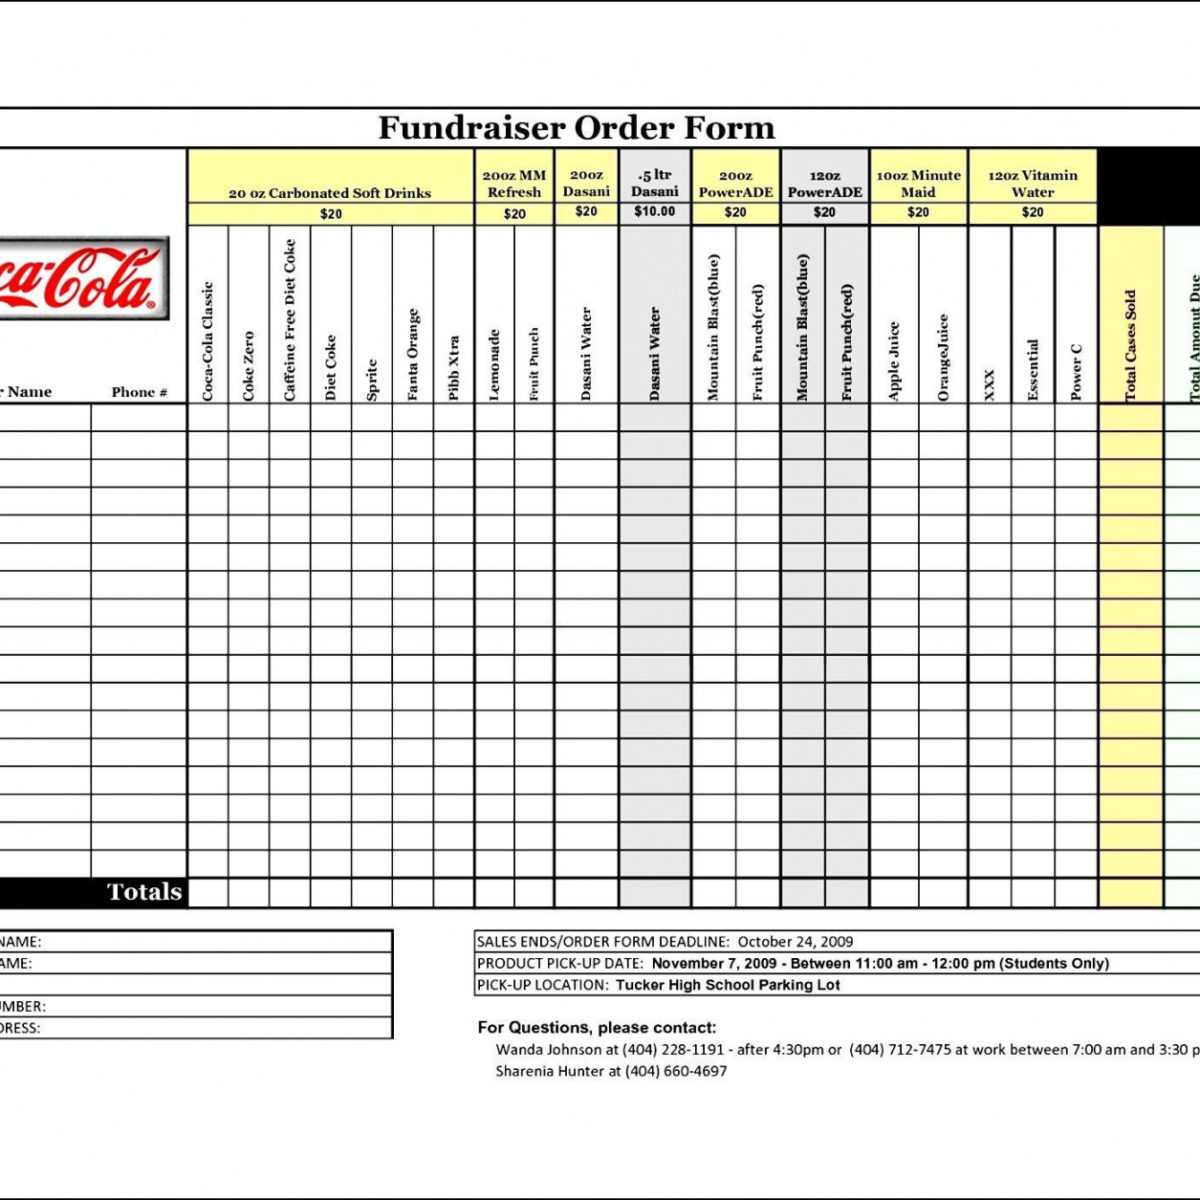 Printable 001 Fundraiser Order Form Template Incredible In Blank Fundraiser Order Form Template